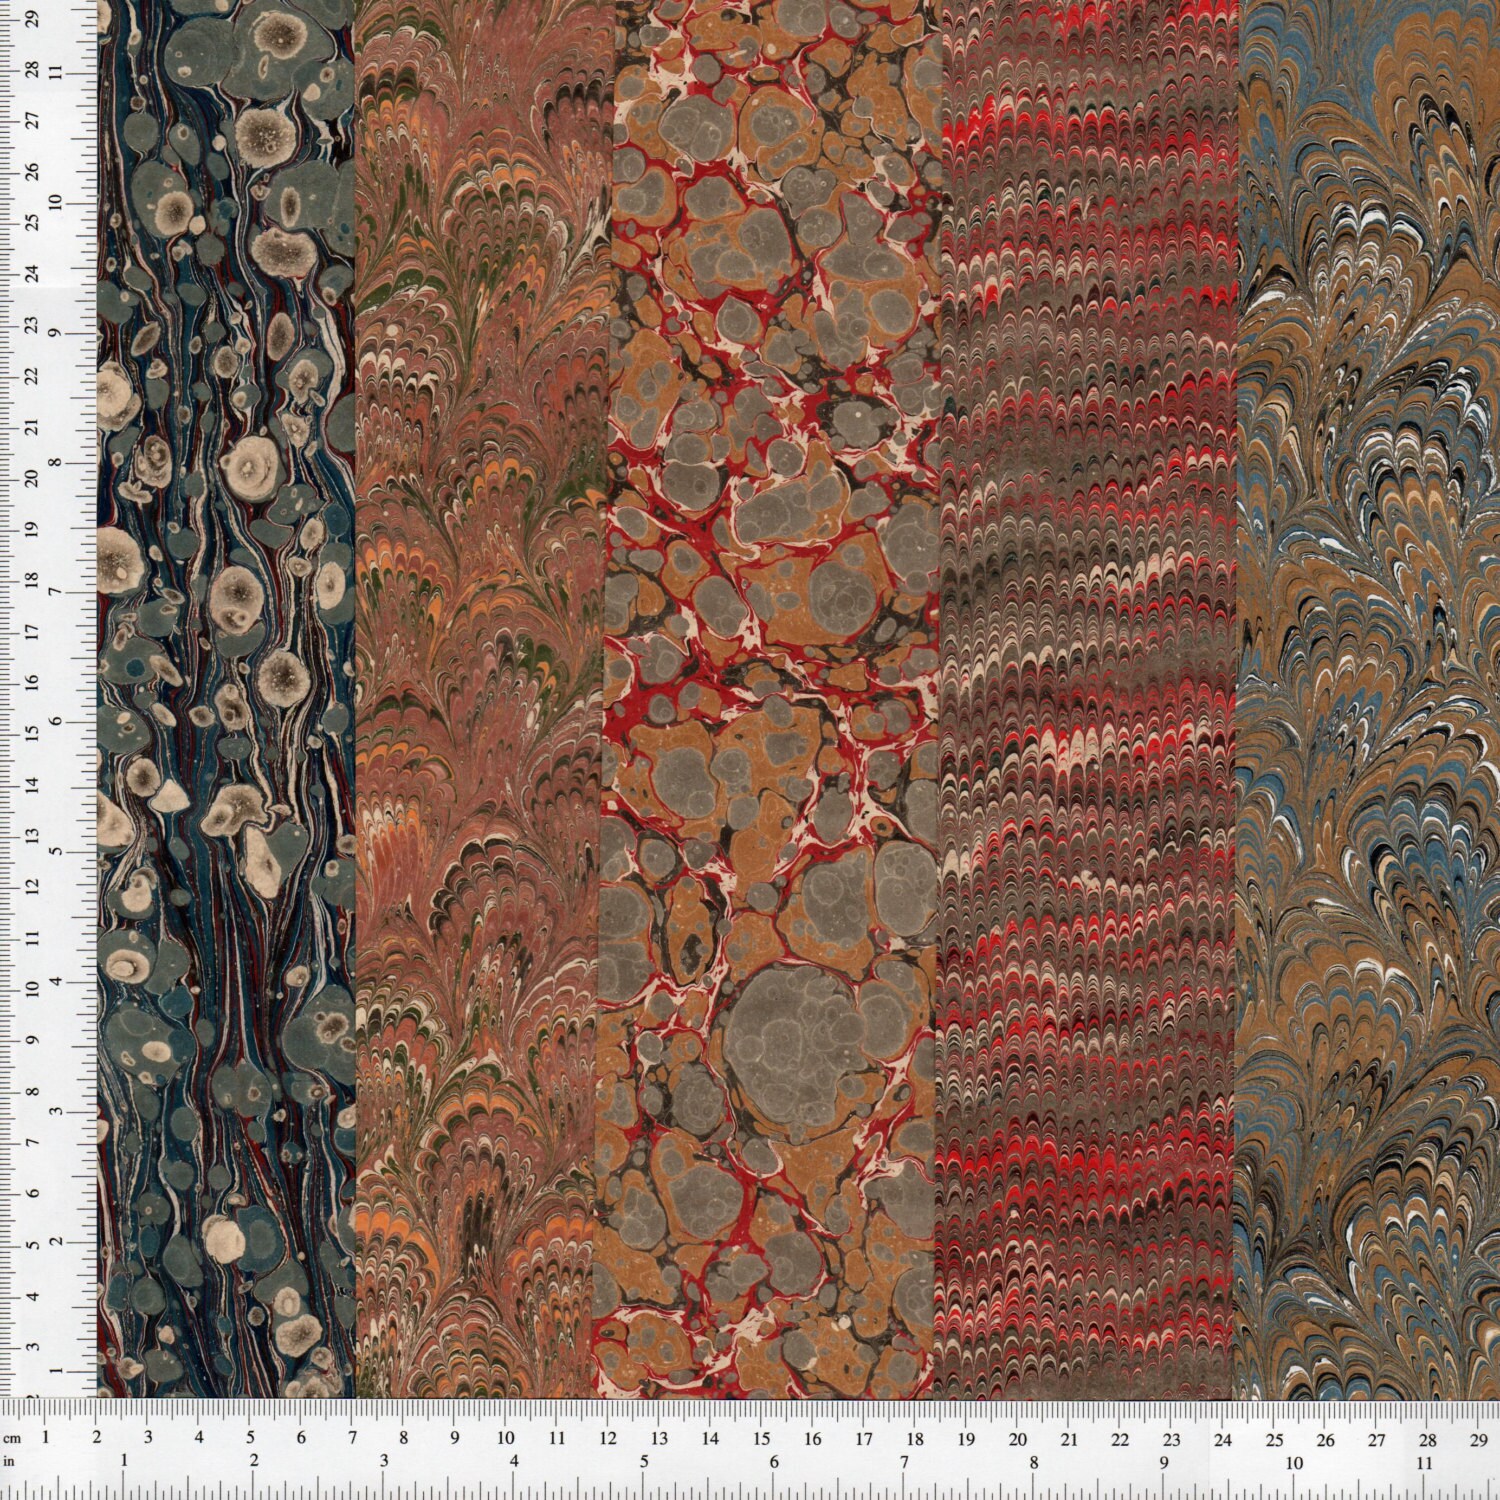 Hand Marbled Paper Set of 5 17x49cm 6.7x19in Bookbinding